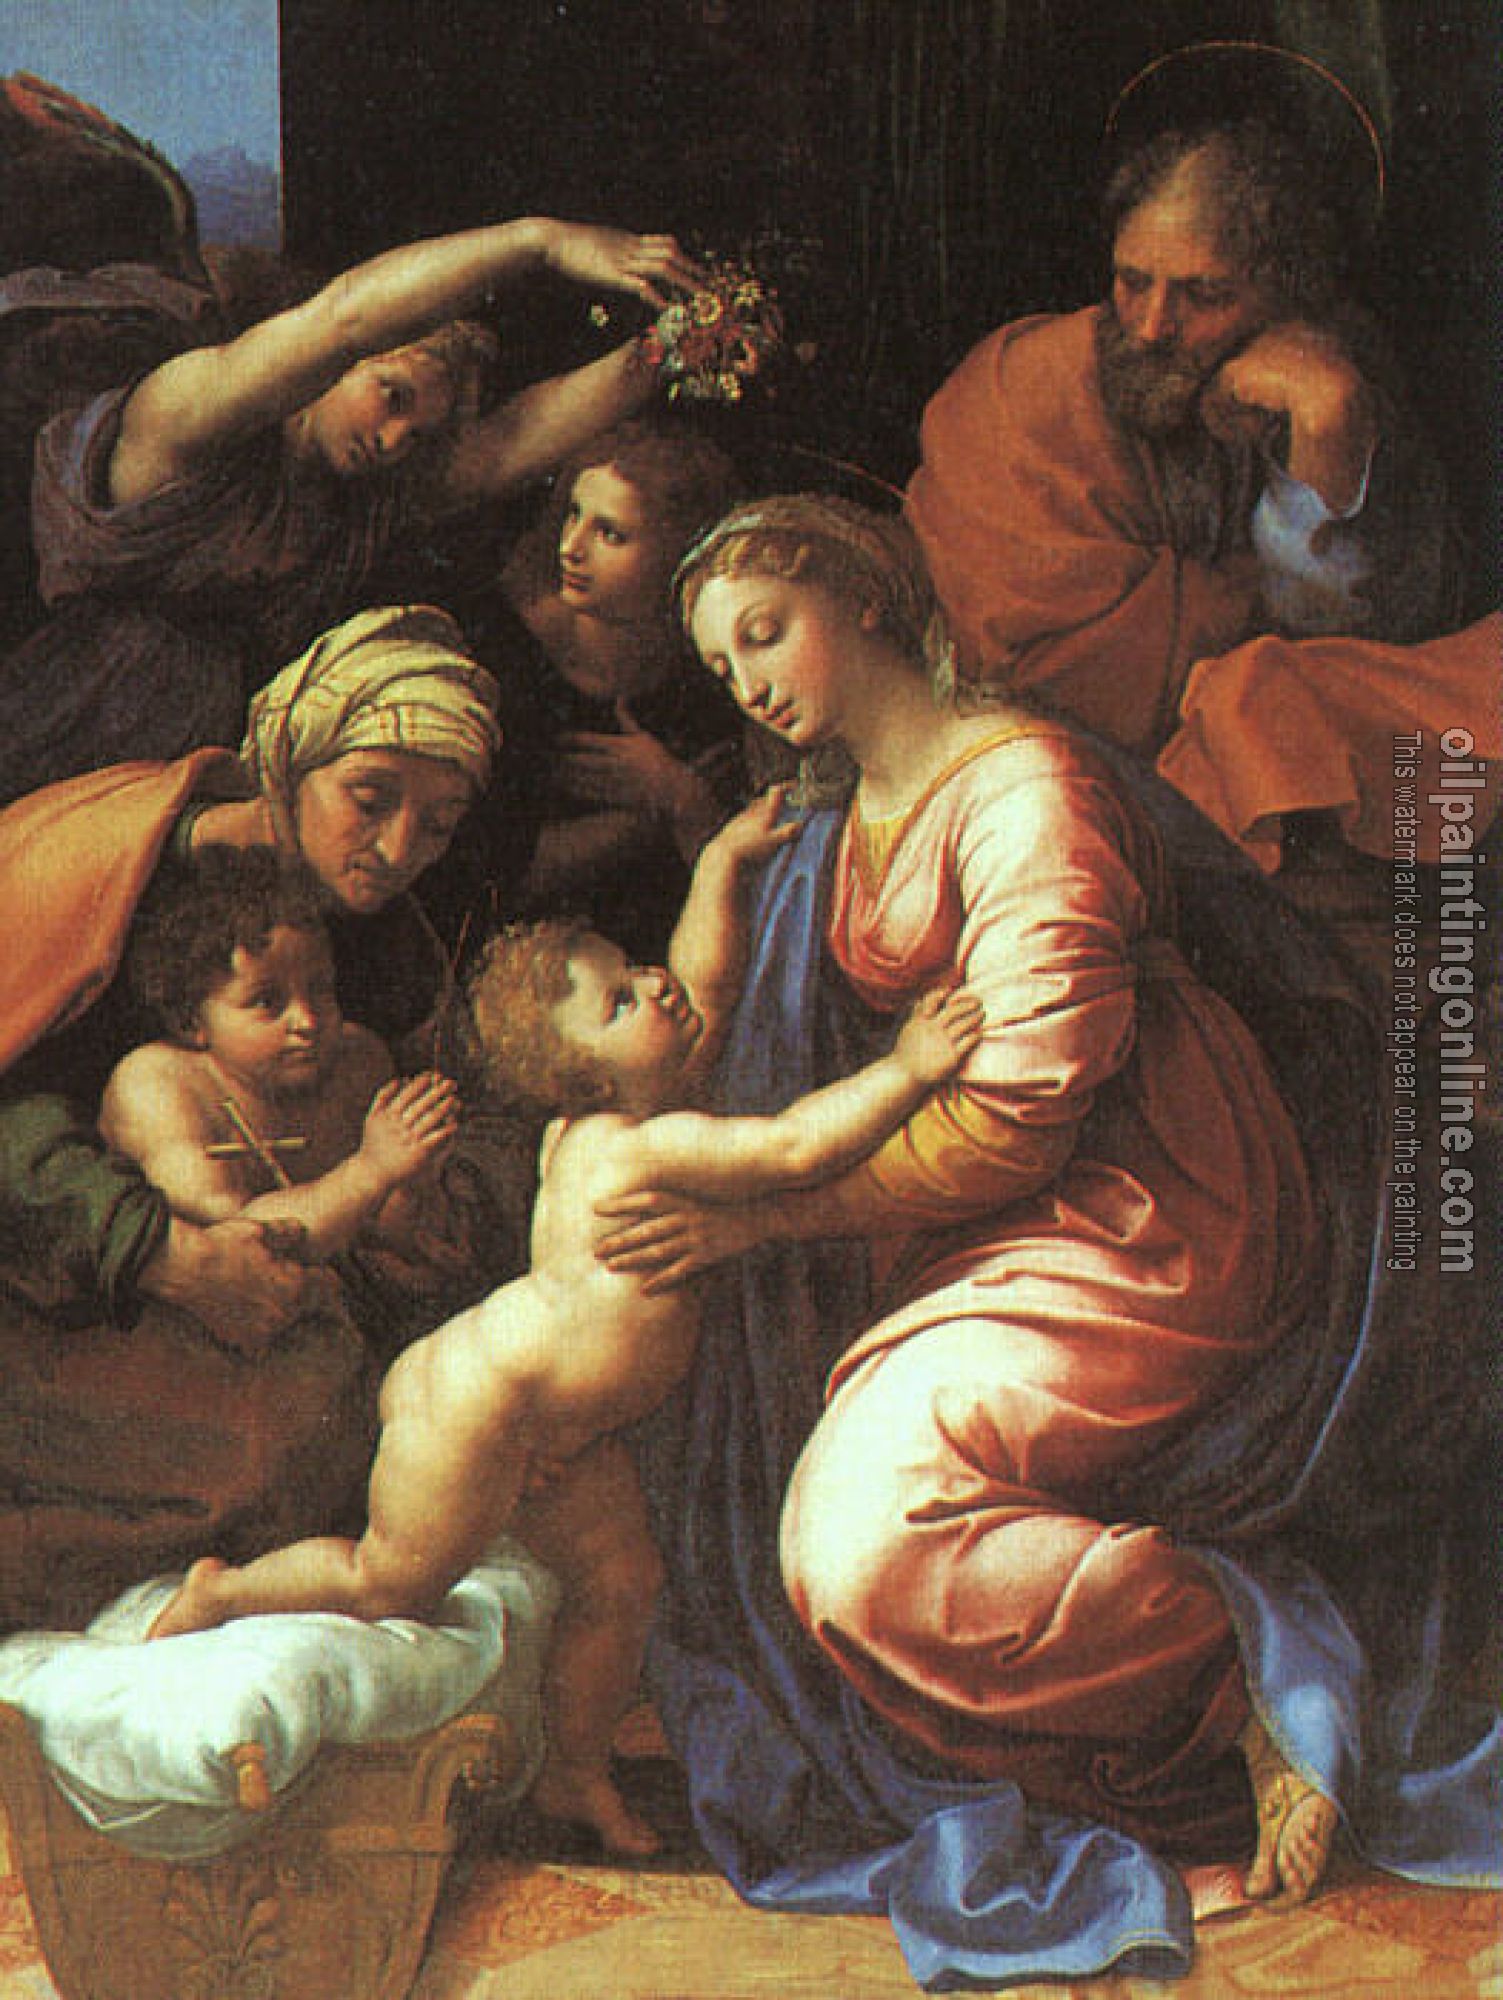 Raphael - The Holy Family